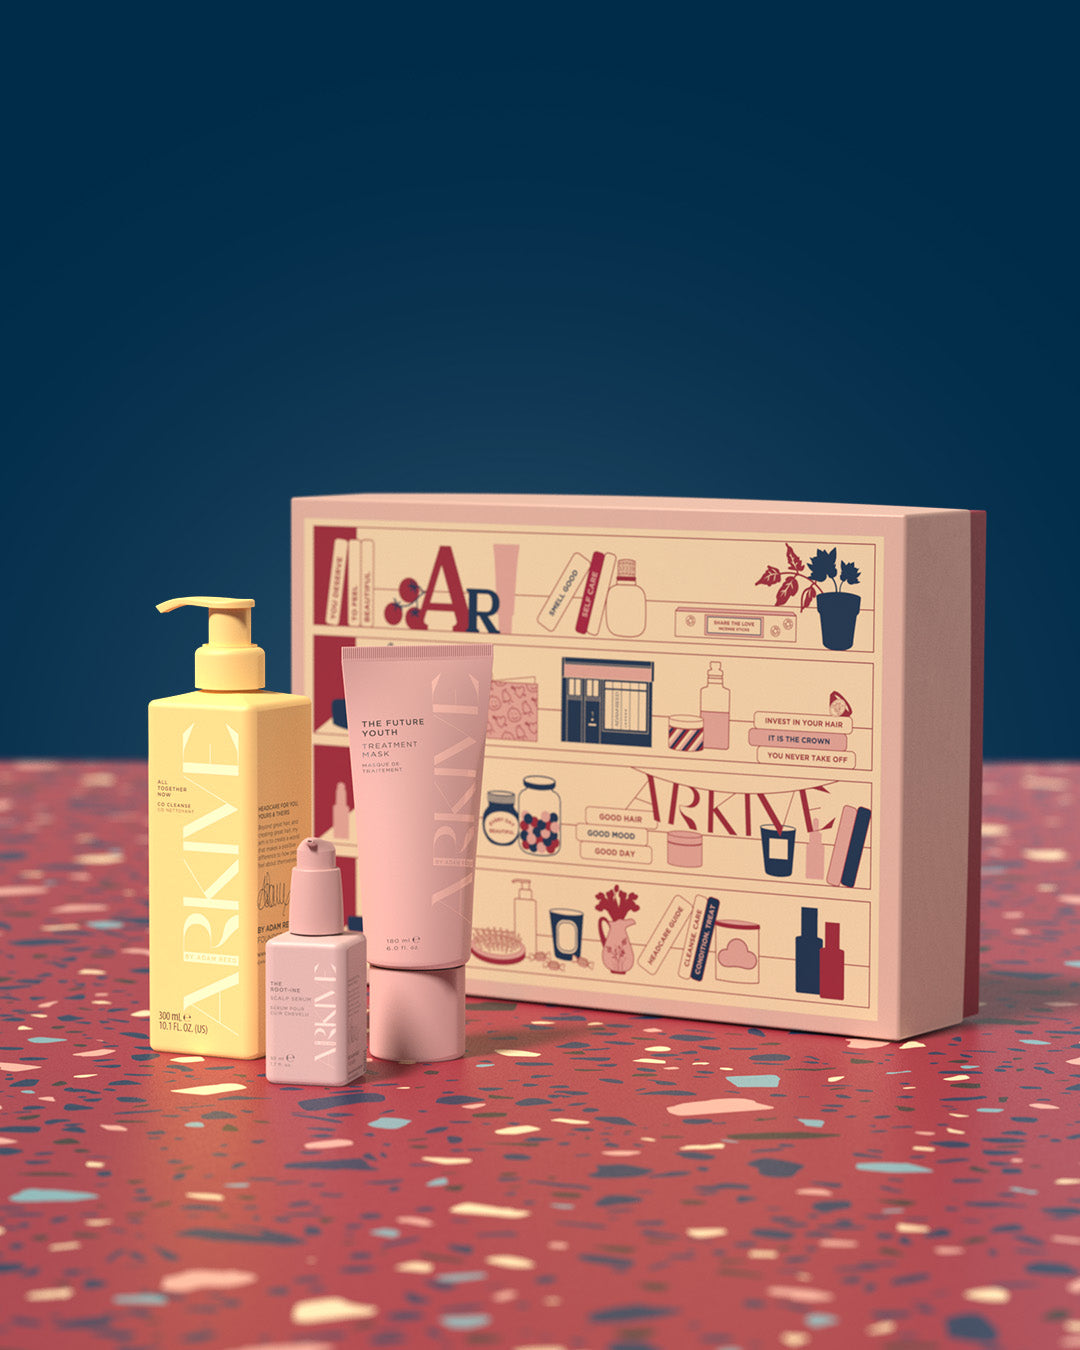 A gift set of Arkive products, including the Future Youth treatment mask, the Rootine calming scalp serum, and All Together co cleanser, laid out on a patterned table